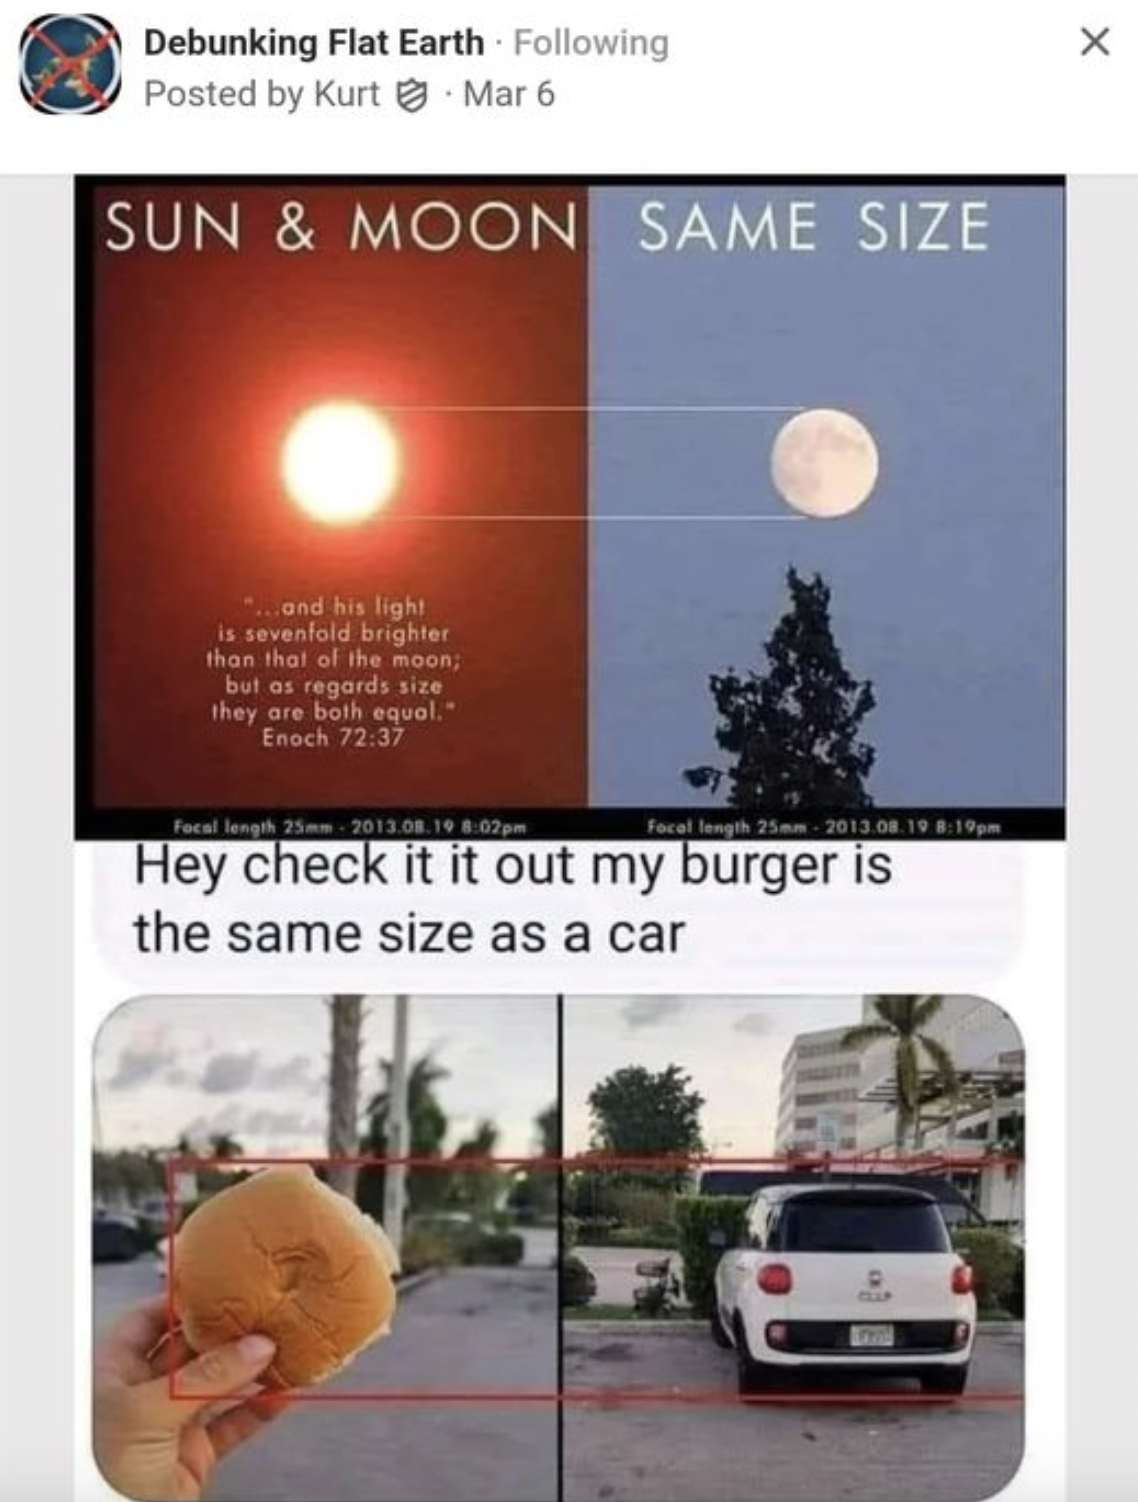 hamburger the size of a car - Debunking Flat Earth ing Posted by Kurt Mar 6 Sun & Moon Same Size and his light is sevenfold brighter than that of the moon; but as regards size they are both equal." Enoch 72.37 Hey check it it out my burger is the same siz